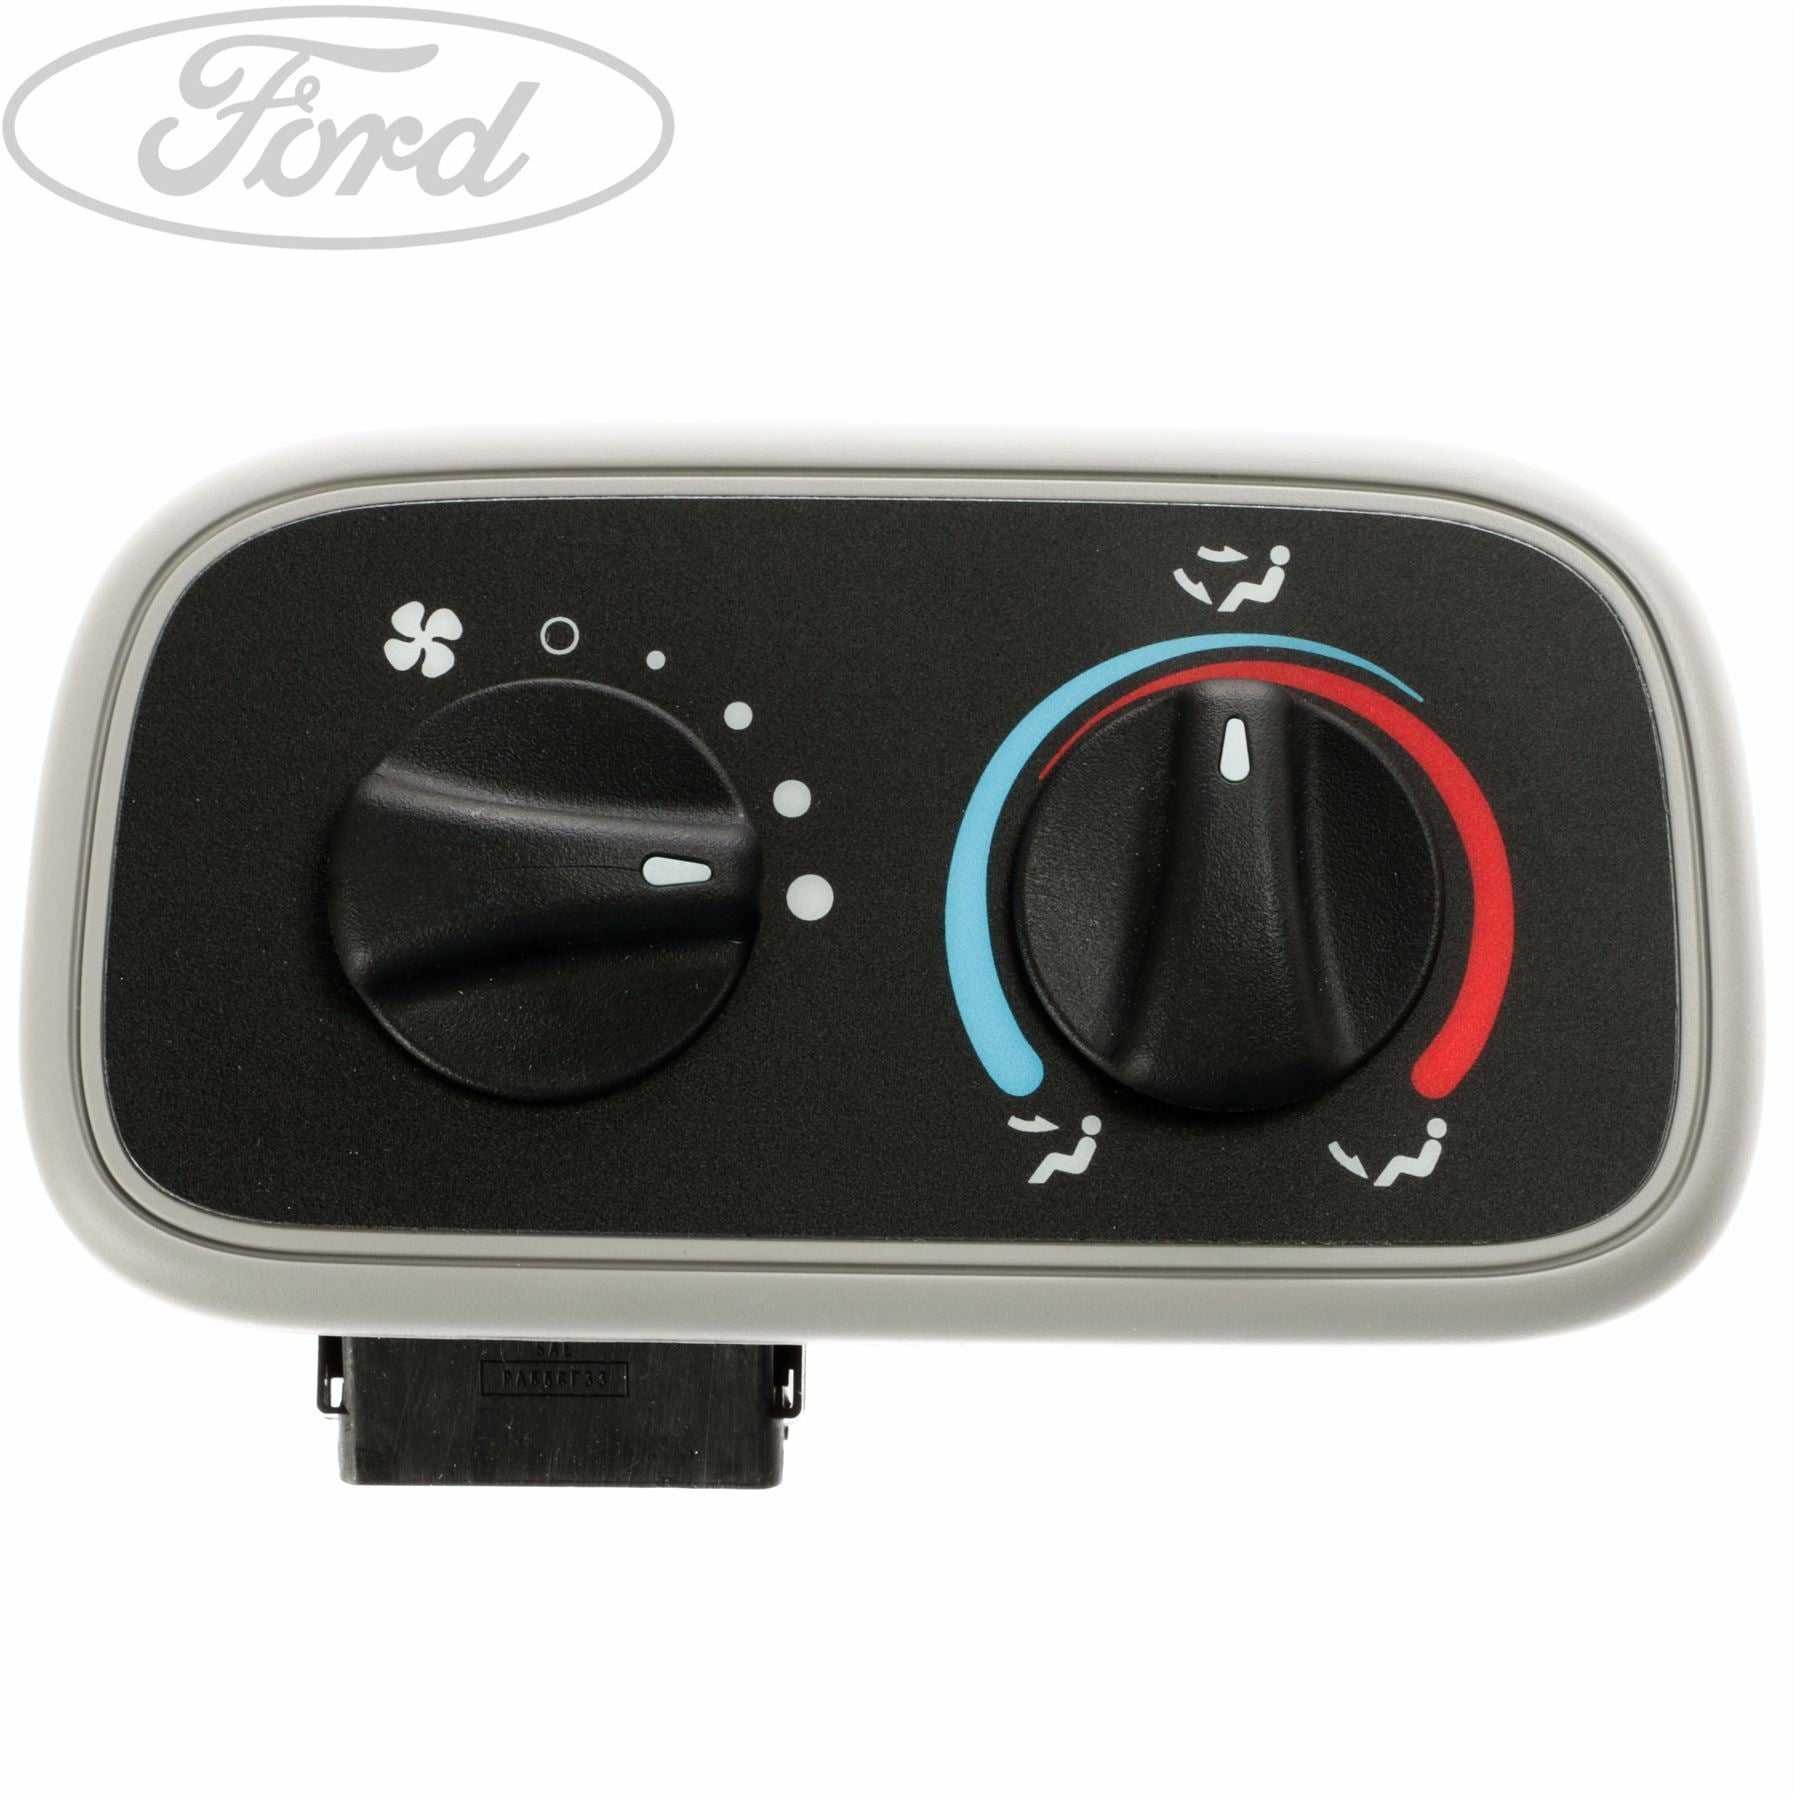 Ford, TRANSIT TRANSIT HEATING & AIR CON CONTROL DIAL